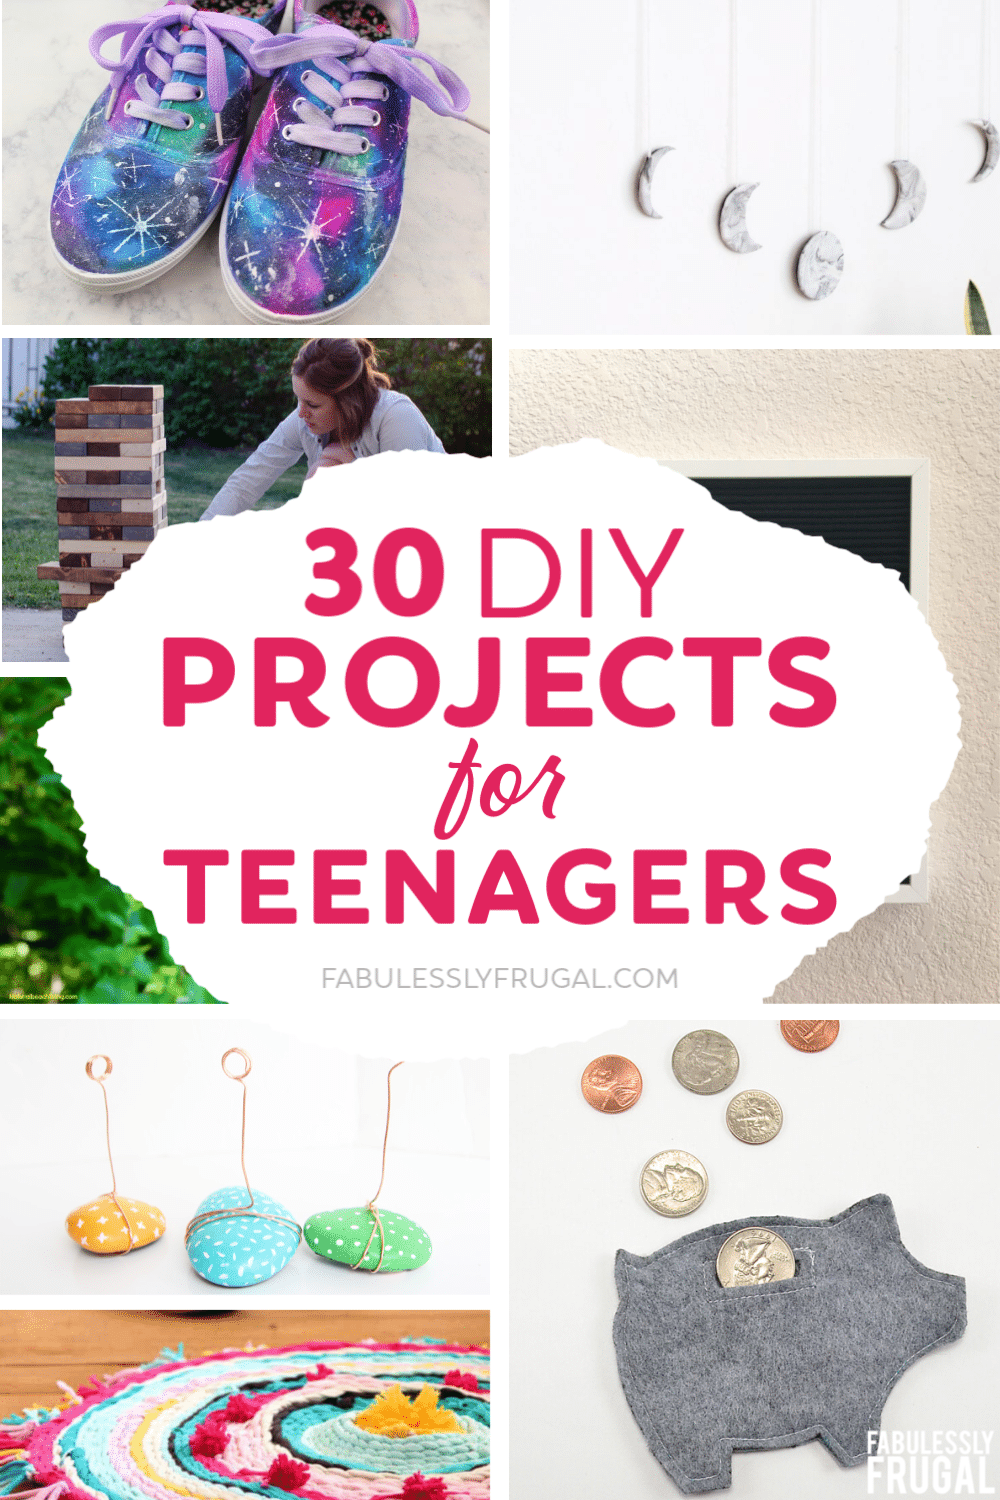 https://fabulesslyfrugal.com/wp-content/uploads/2023/03/diy-projects-for-teenagers.png